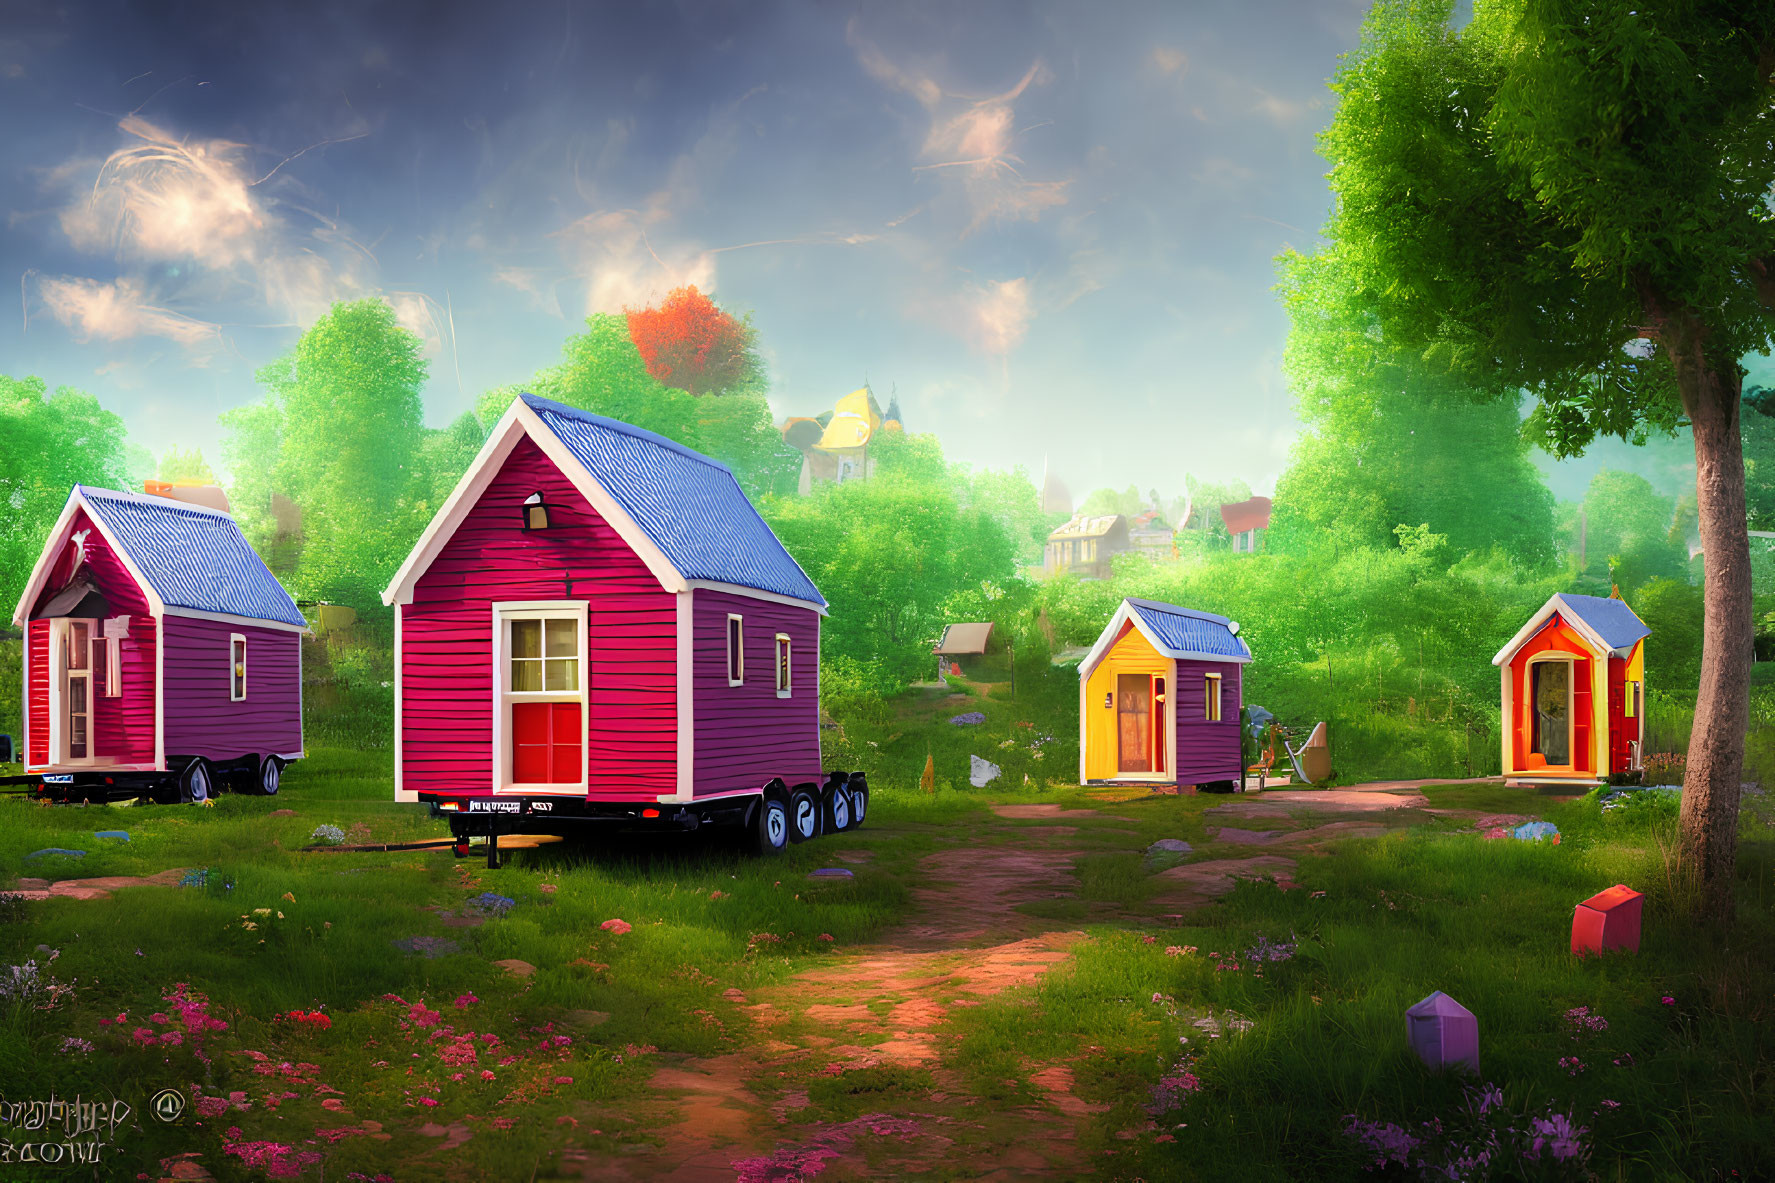 Vibrant tiny houses on wheels in tranquil meadow setting